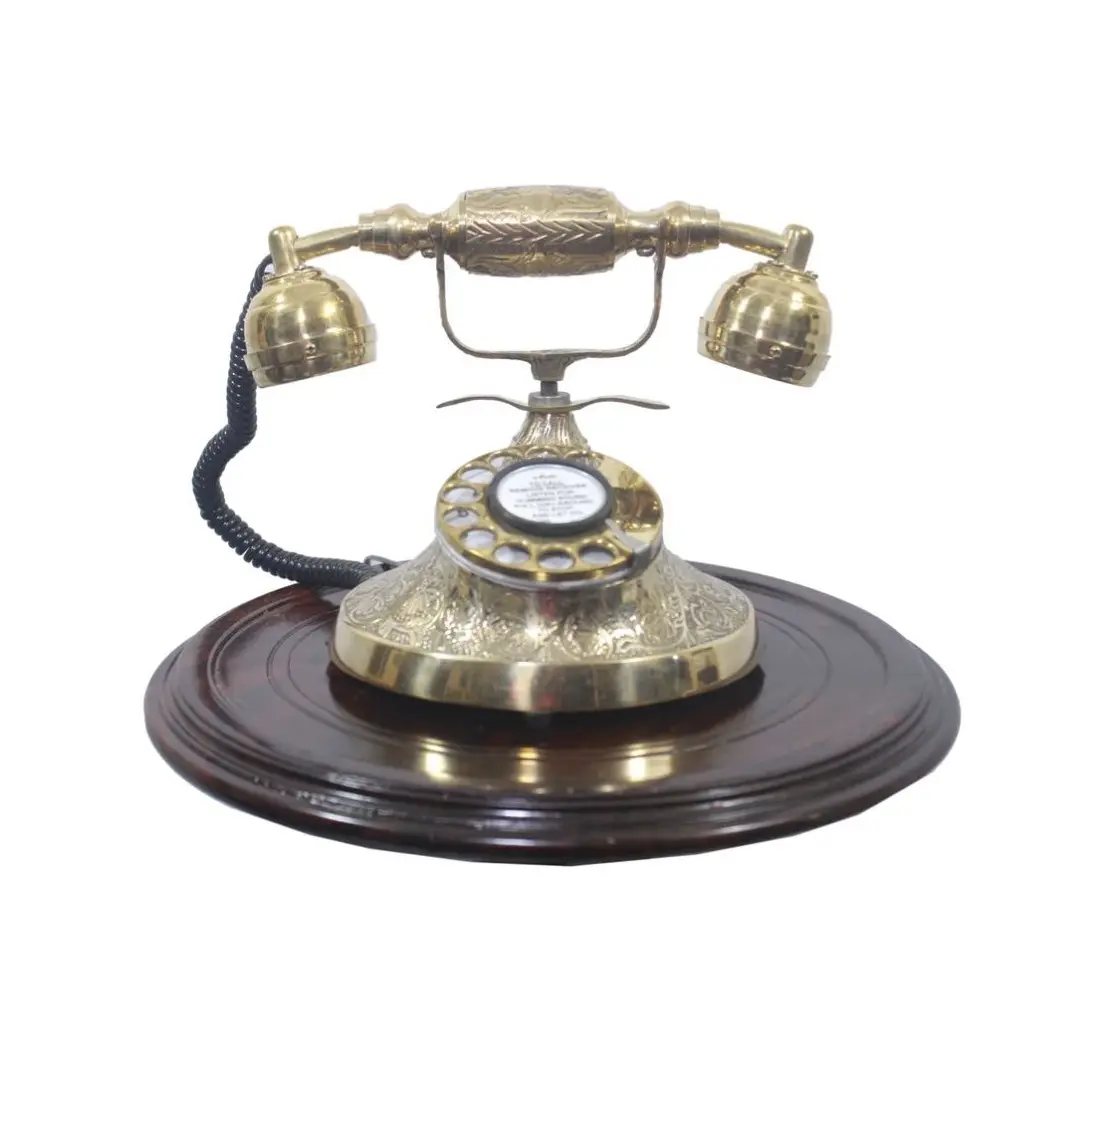 Luxury antique telephone royal for office home decor gift living room antique interior dial phone retro table top decoration